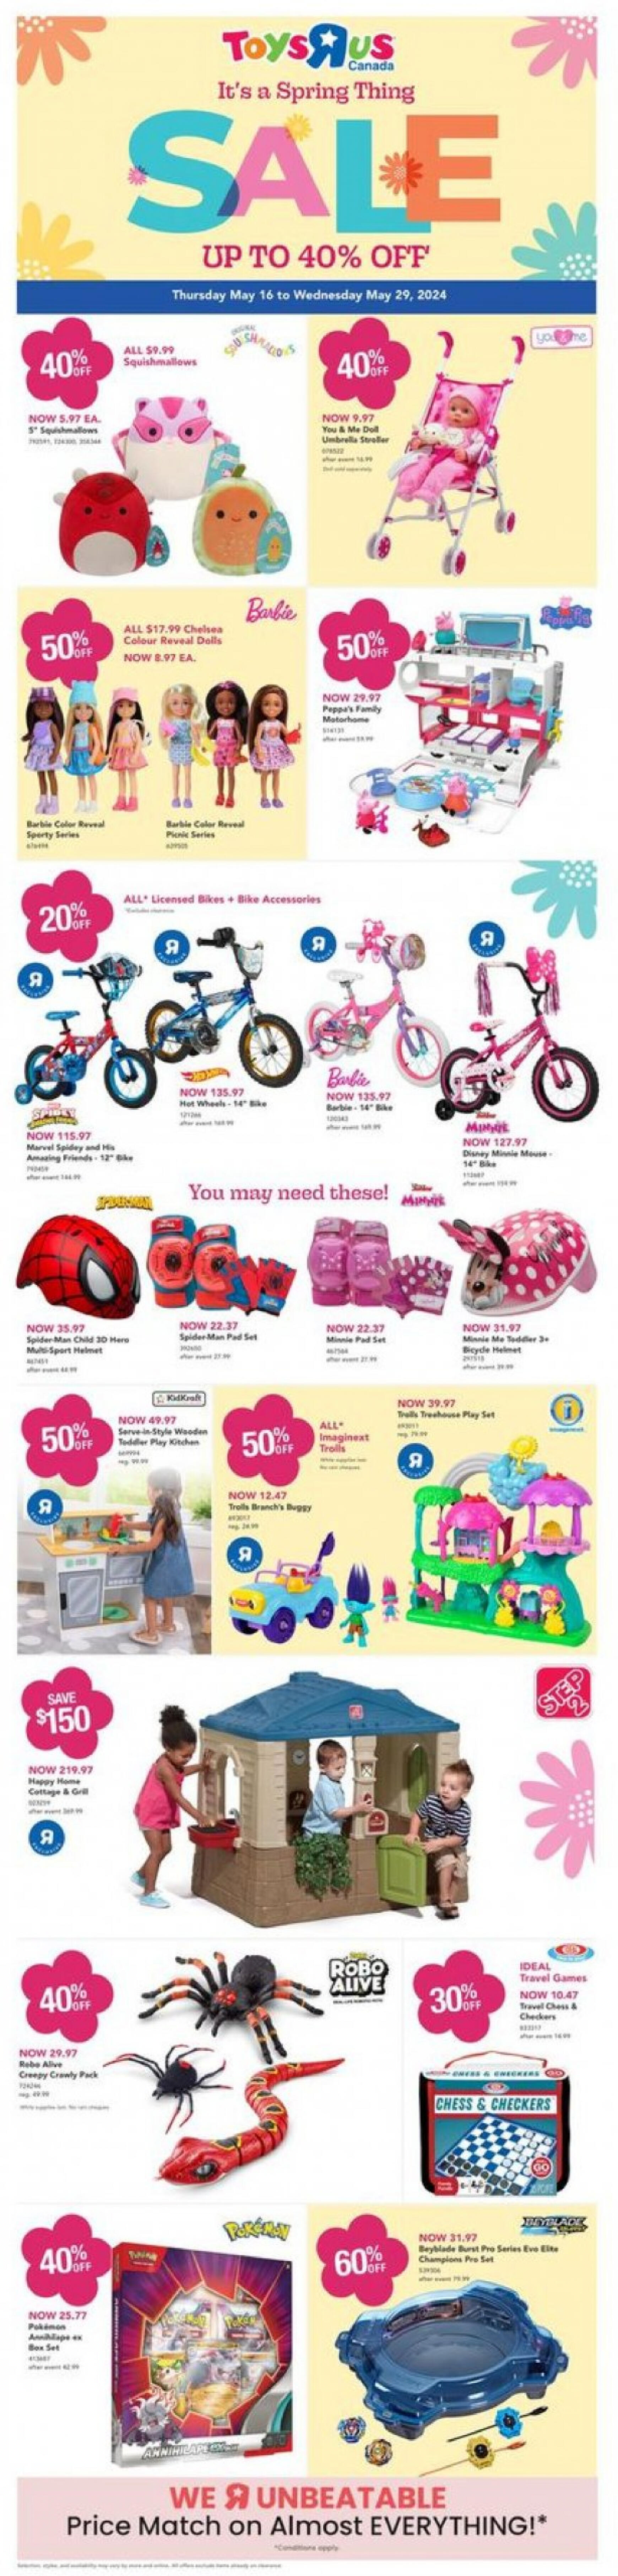 toys-r-us - Toysrus flyer current 16.05. - 29.05.